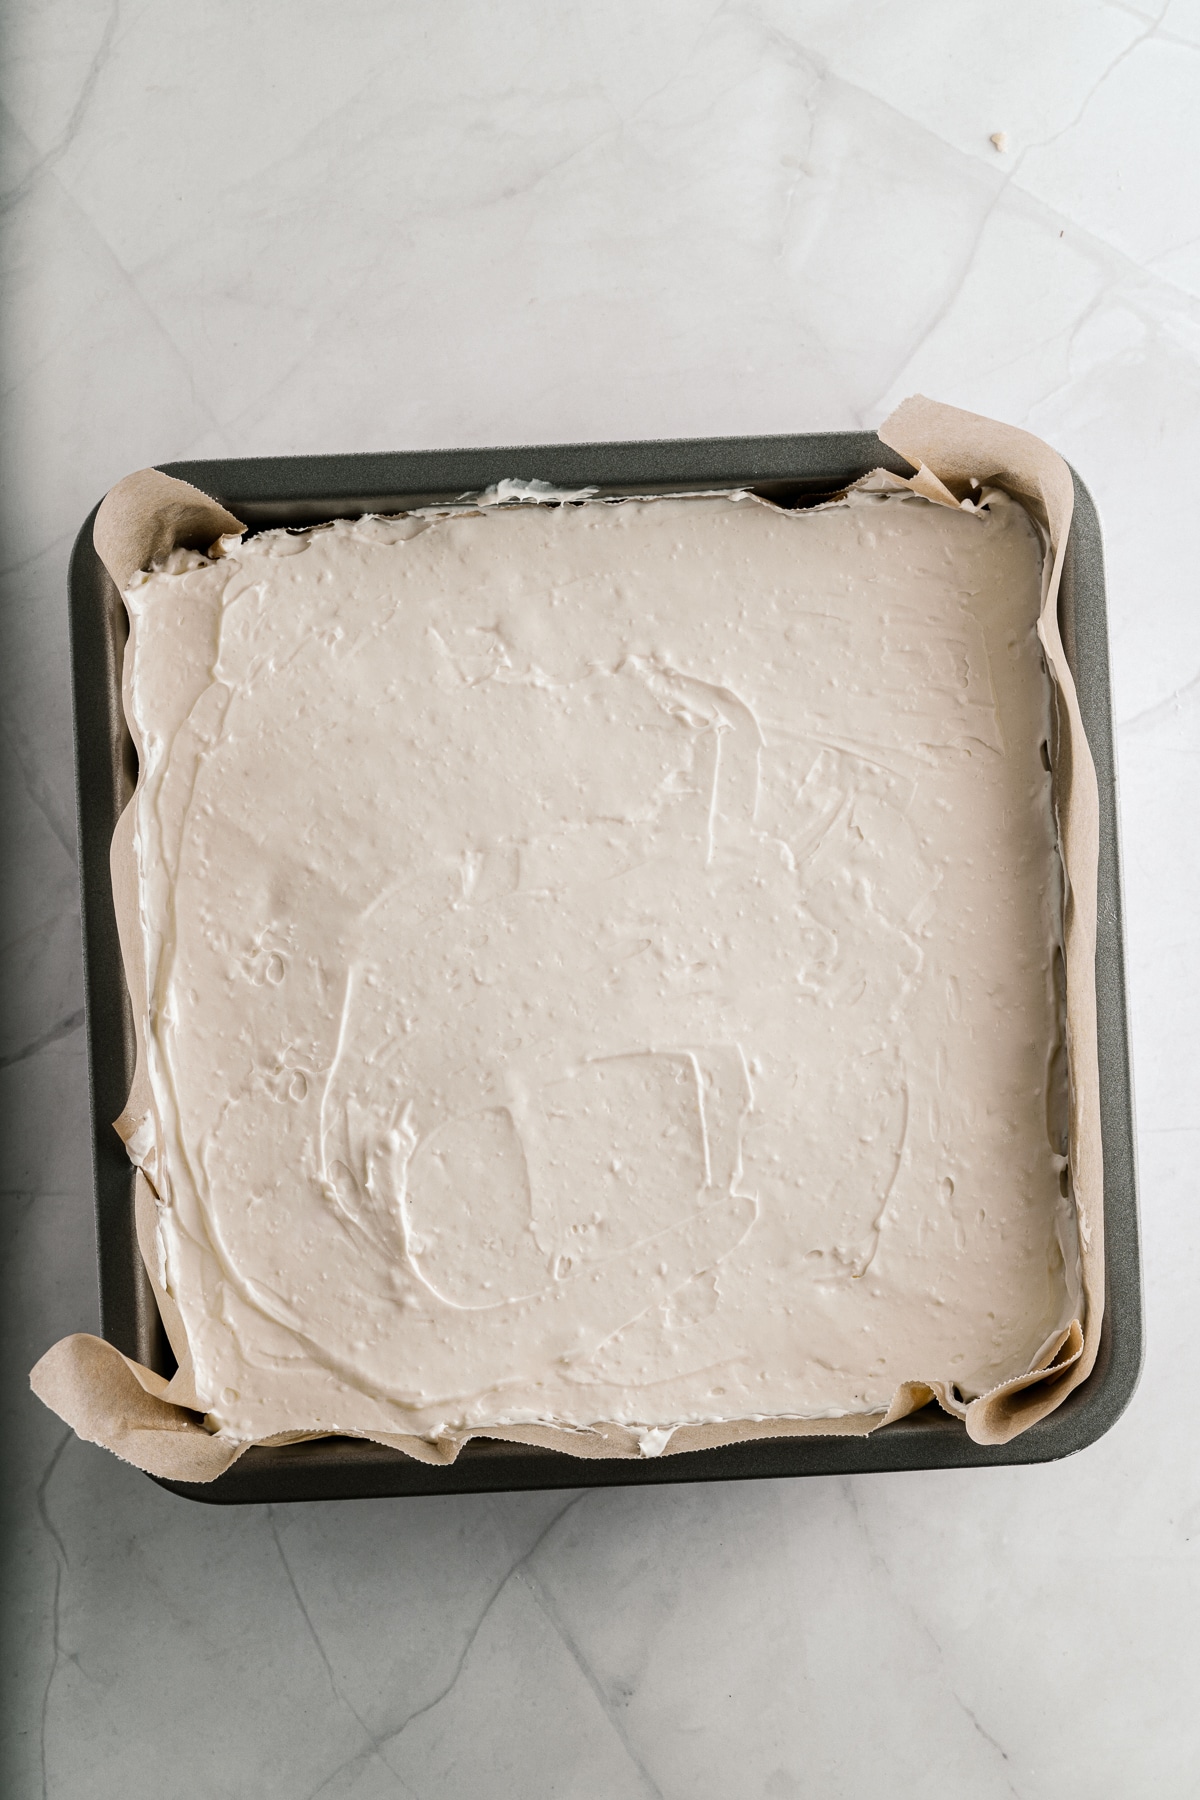 Overhead picture of cheesecake layer in a baking pan.